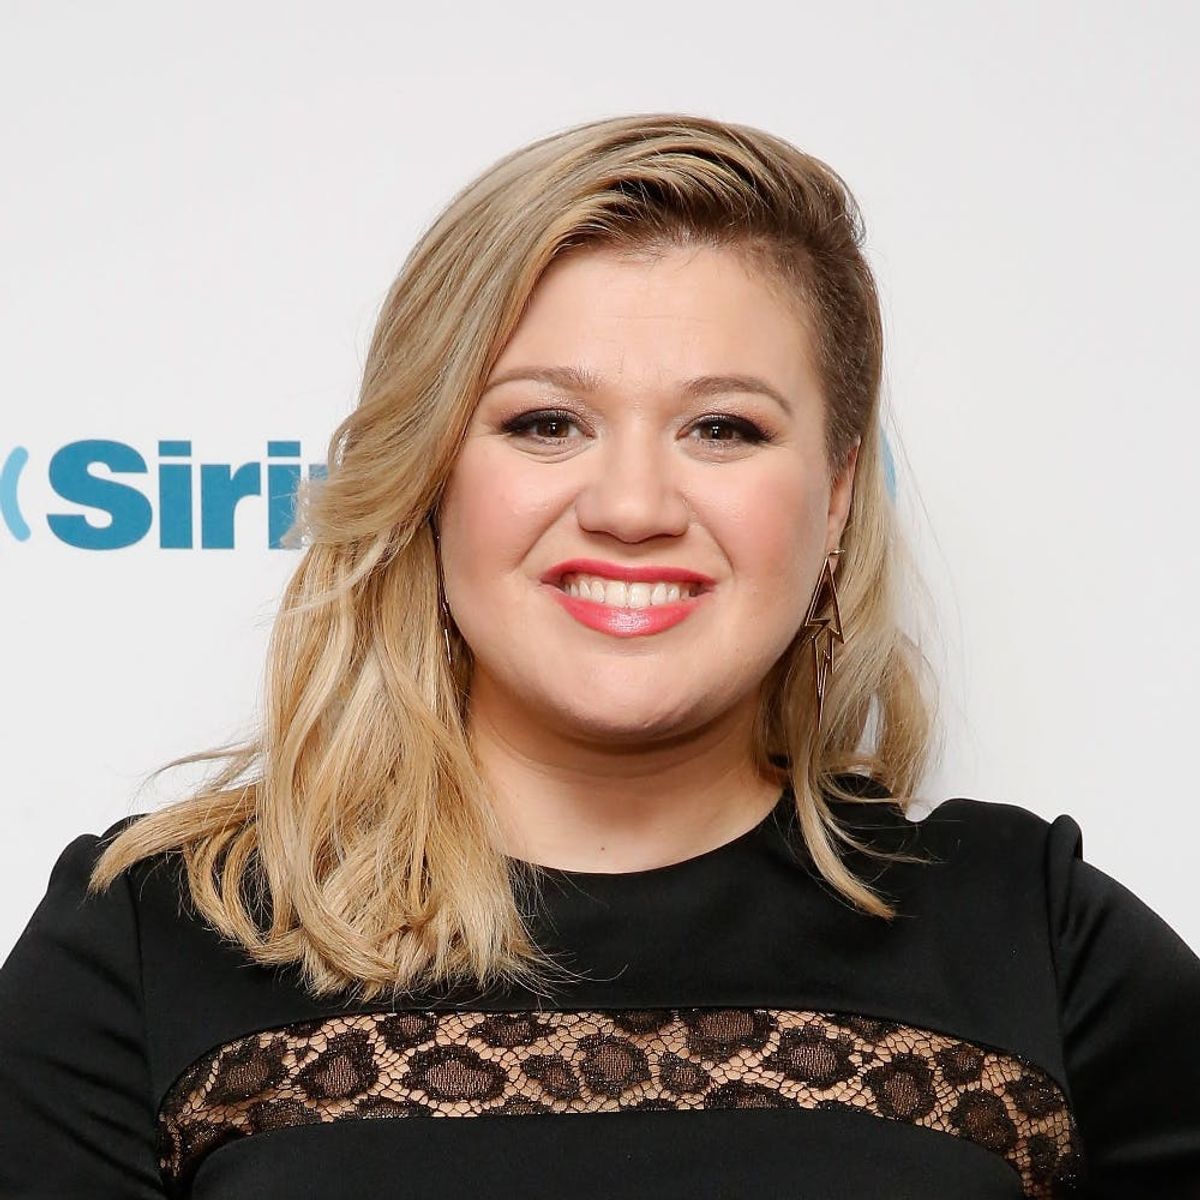 Kelly Clarkson Had Her Baby Boy and Here’s His Sweetly Sophisticated Name